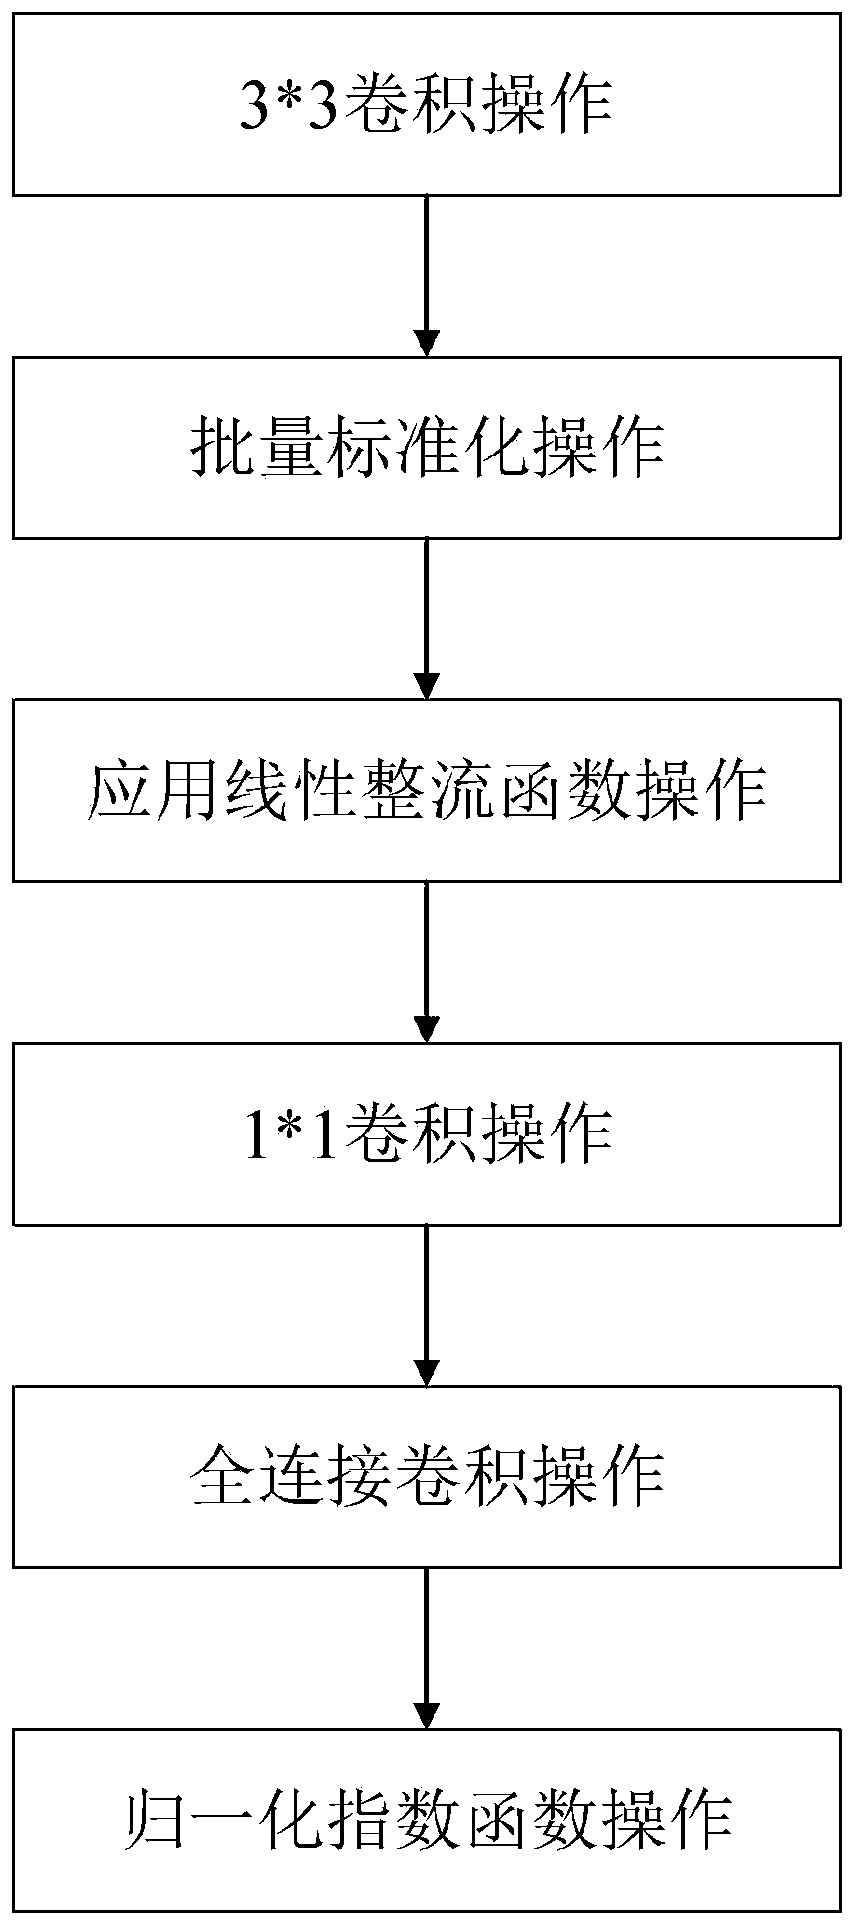 Intelligent credit and information authentication system and method